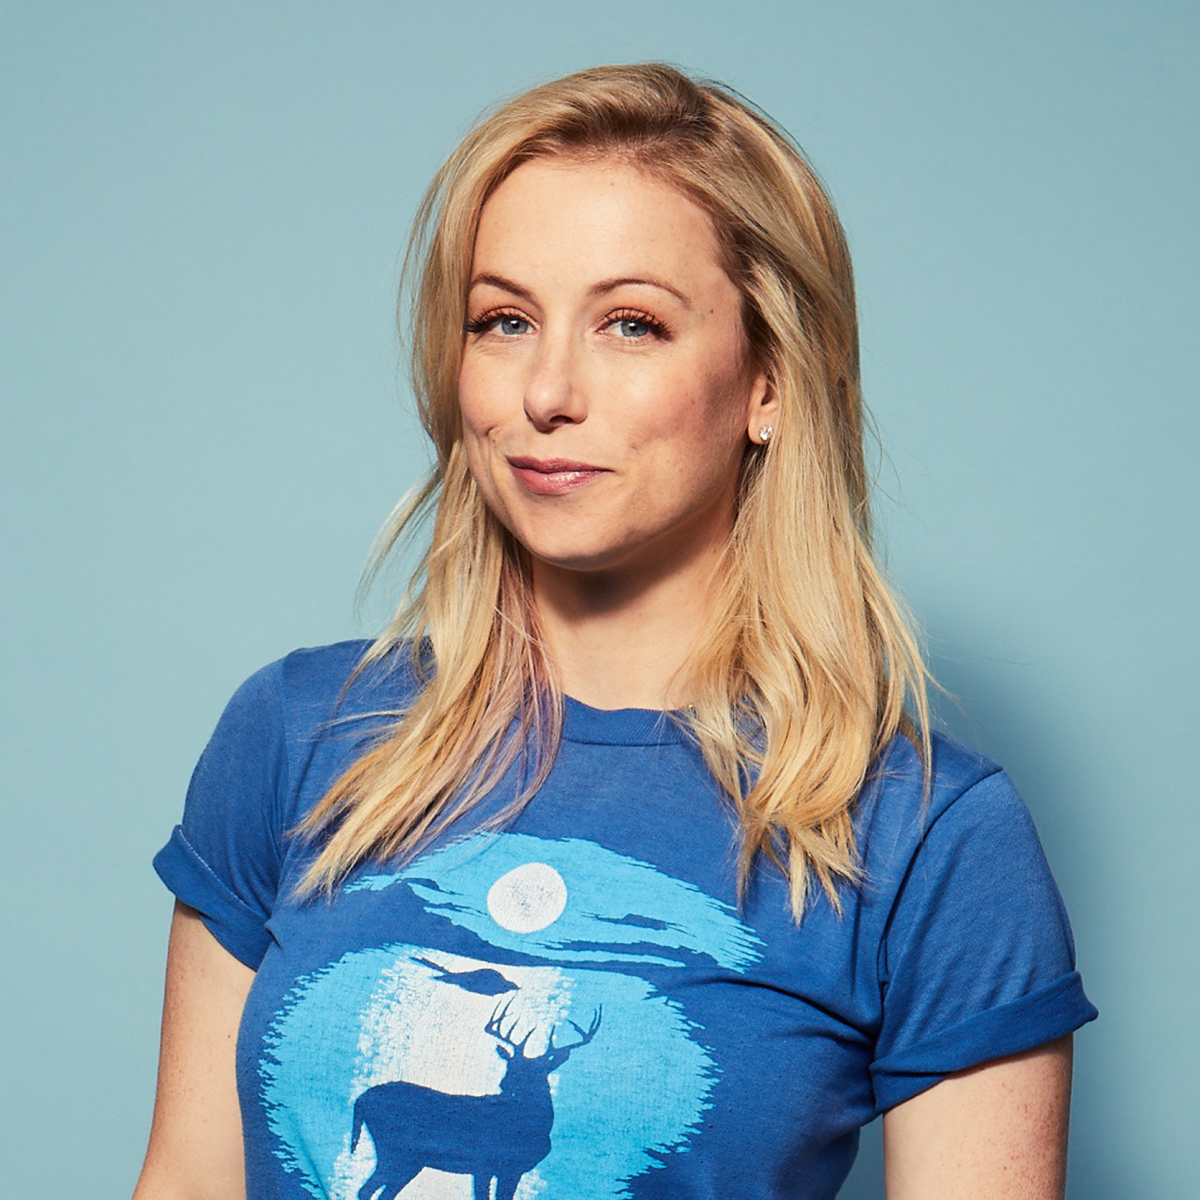 California Center for the Arts, Escondido, presents Iliza Shlesinger on Oct. 24, hosted by Cal State San Marcos.